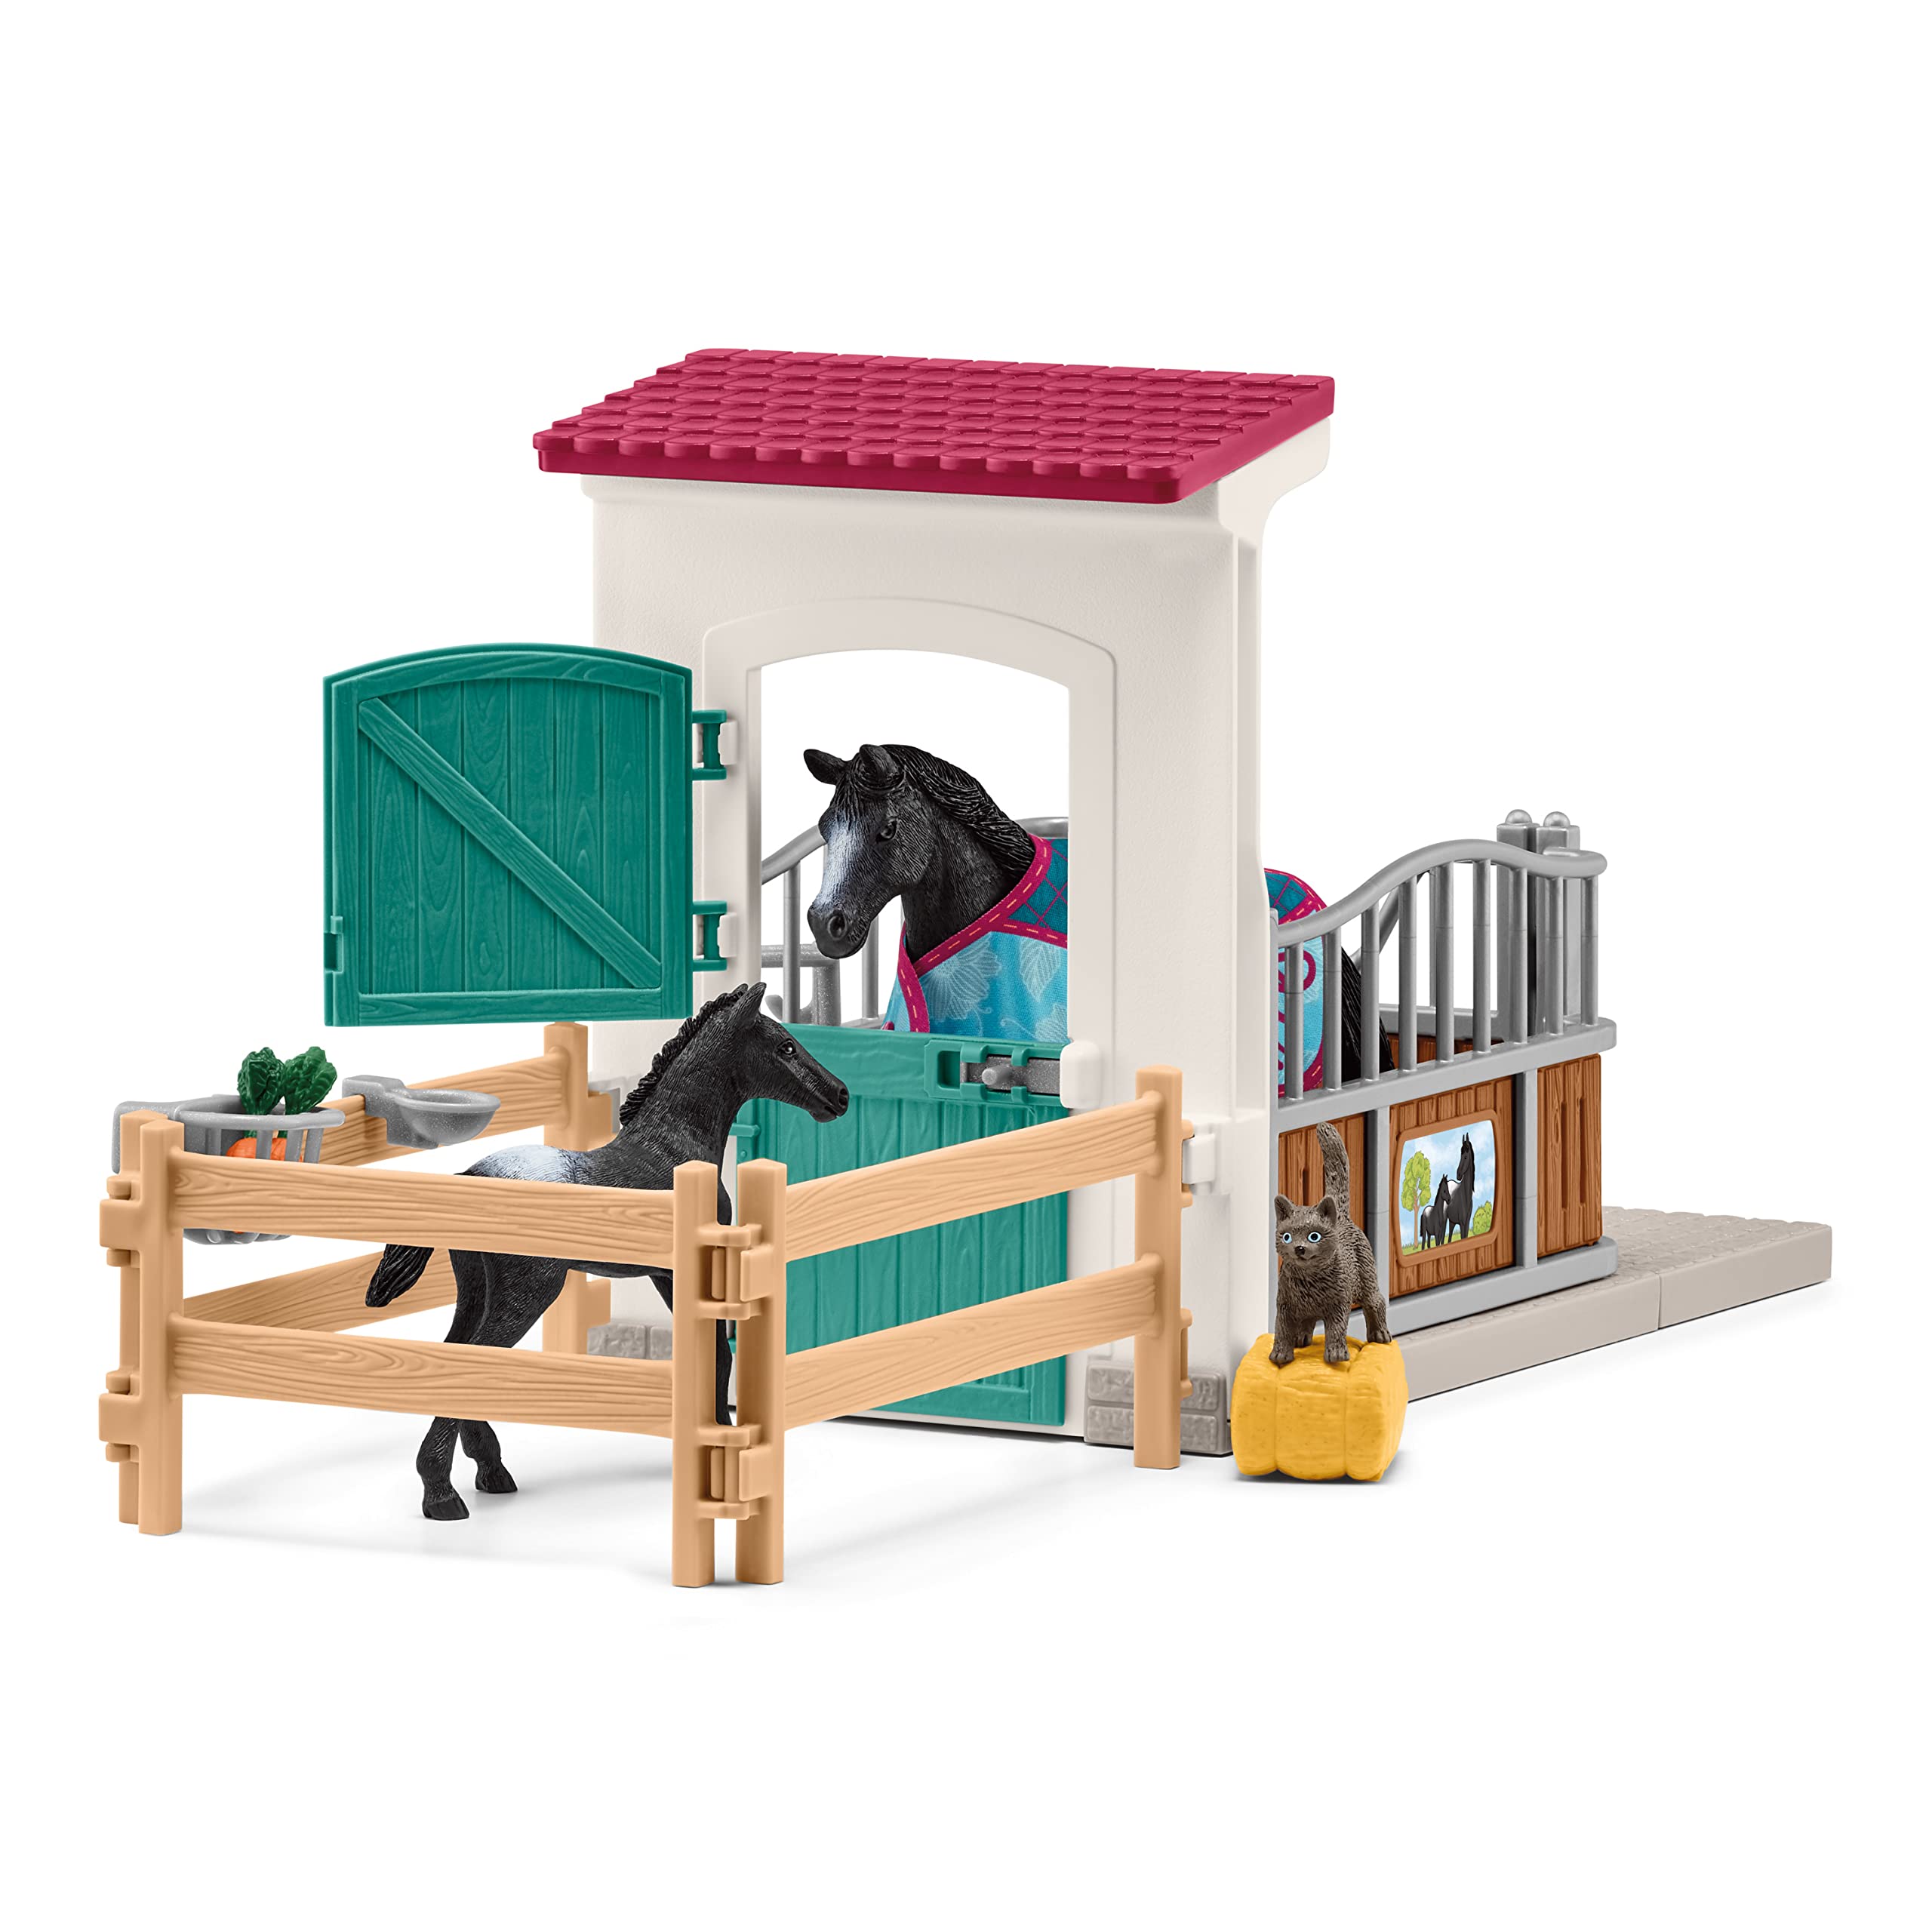 Schleich Horse Club, Horse Sets for Girls and Boys, Horse Stall with Mare and Foal with Horse Figurines and Accessories, Ages 5+